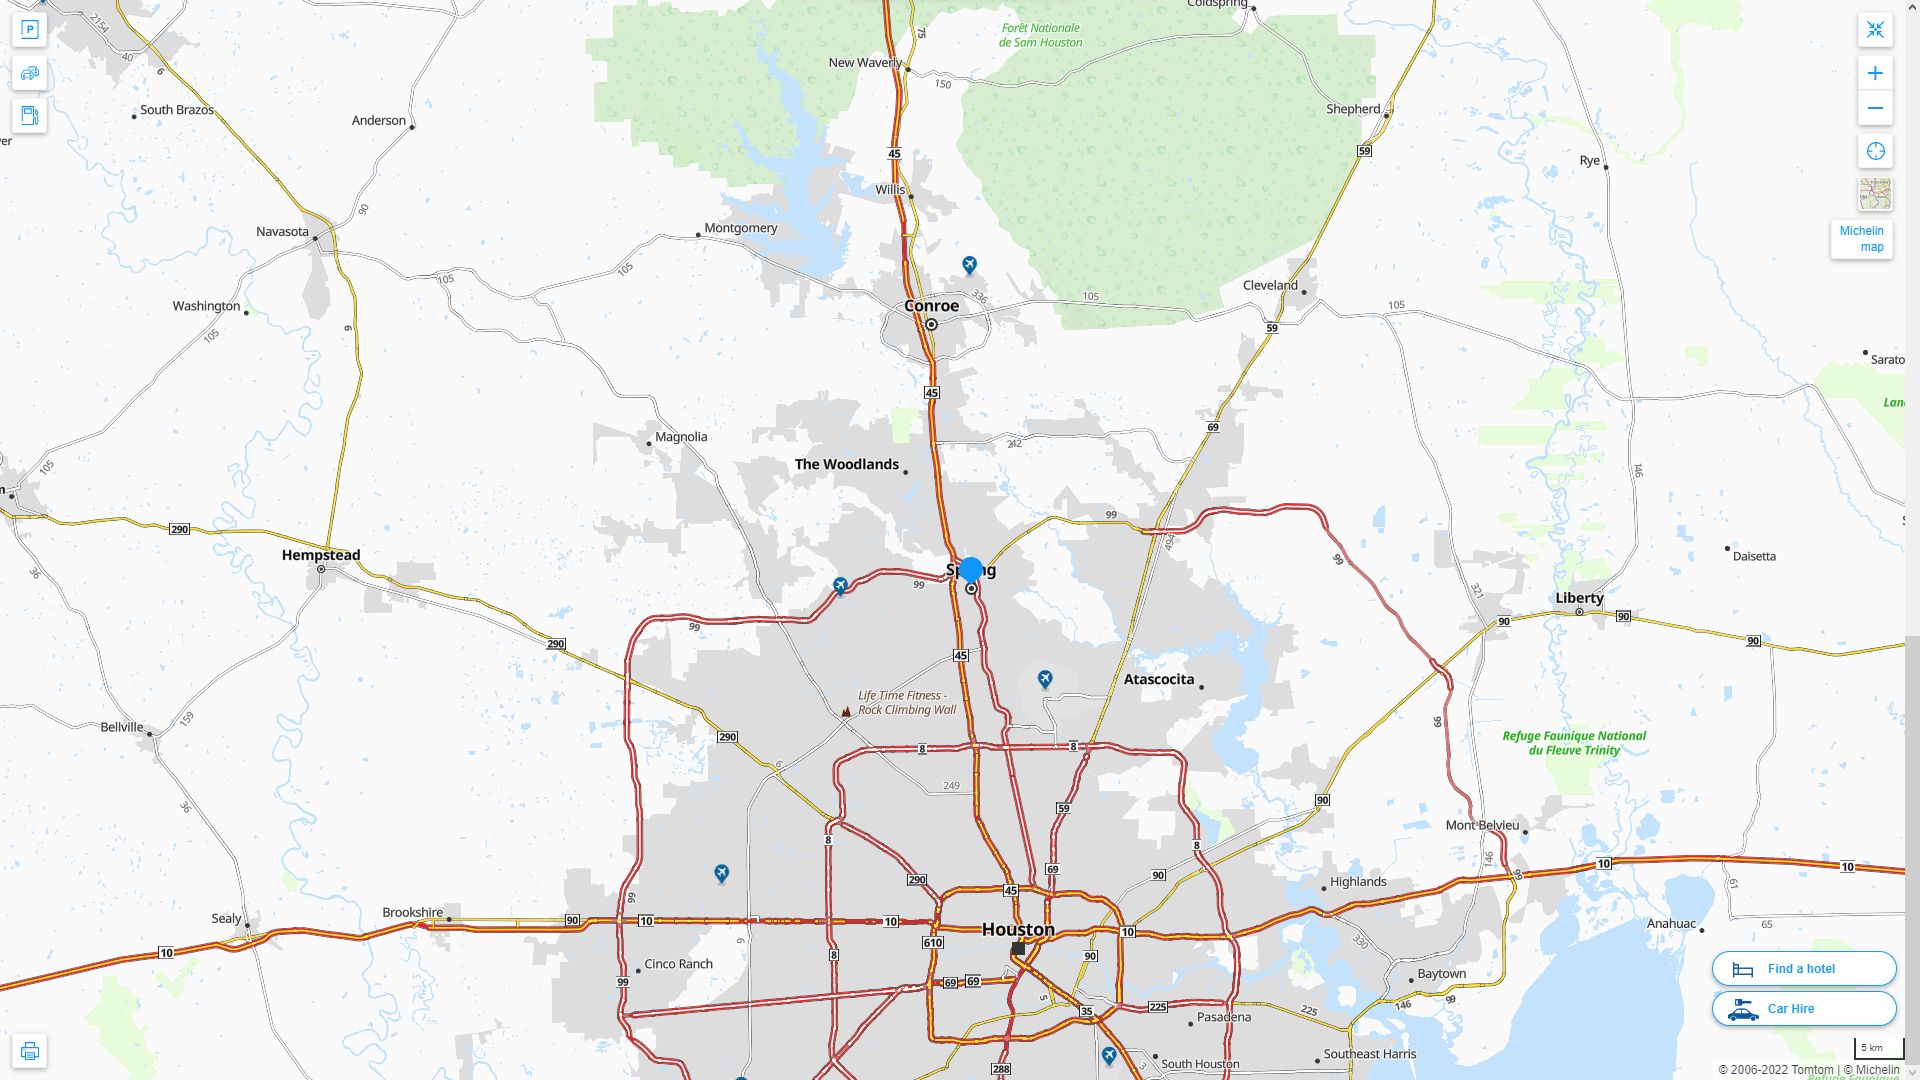 Spring Texas Highway and Road Map